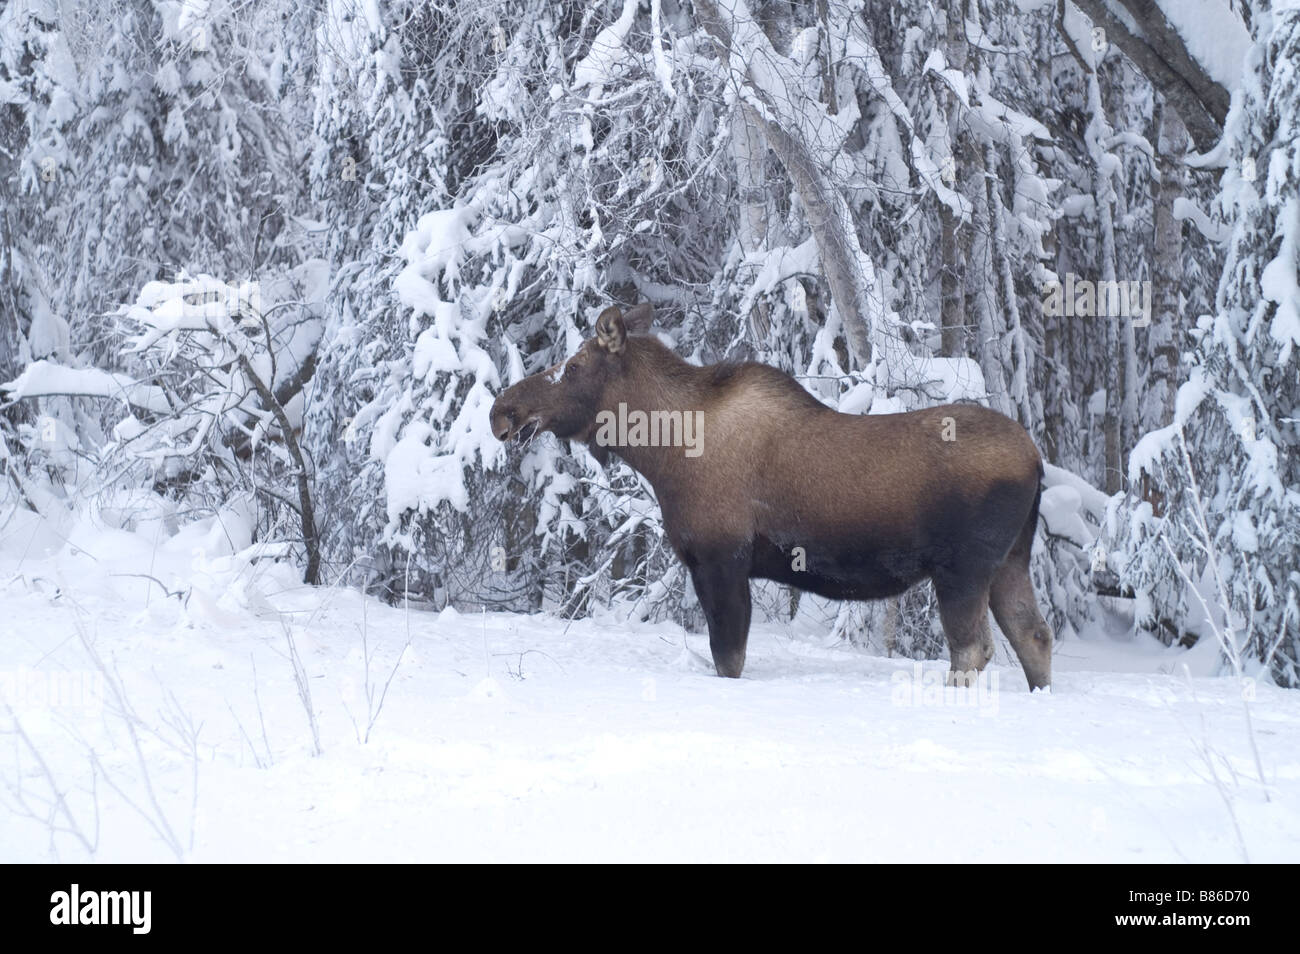 Moose Feeds on branches at tree line in winter snow Stock Photo